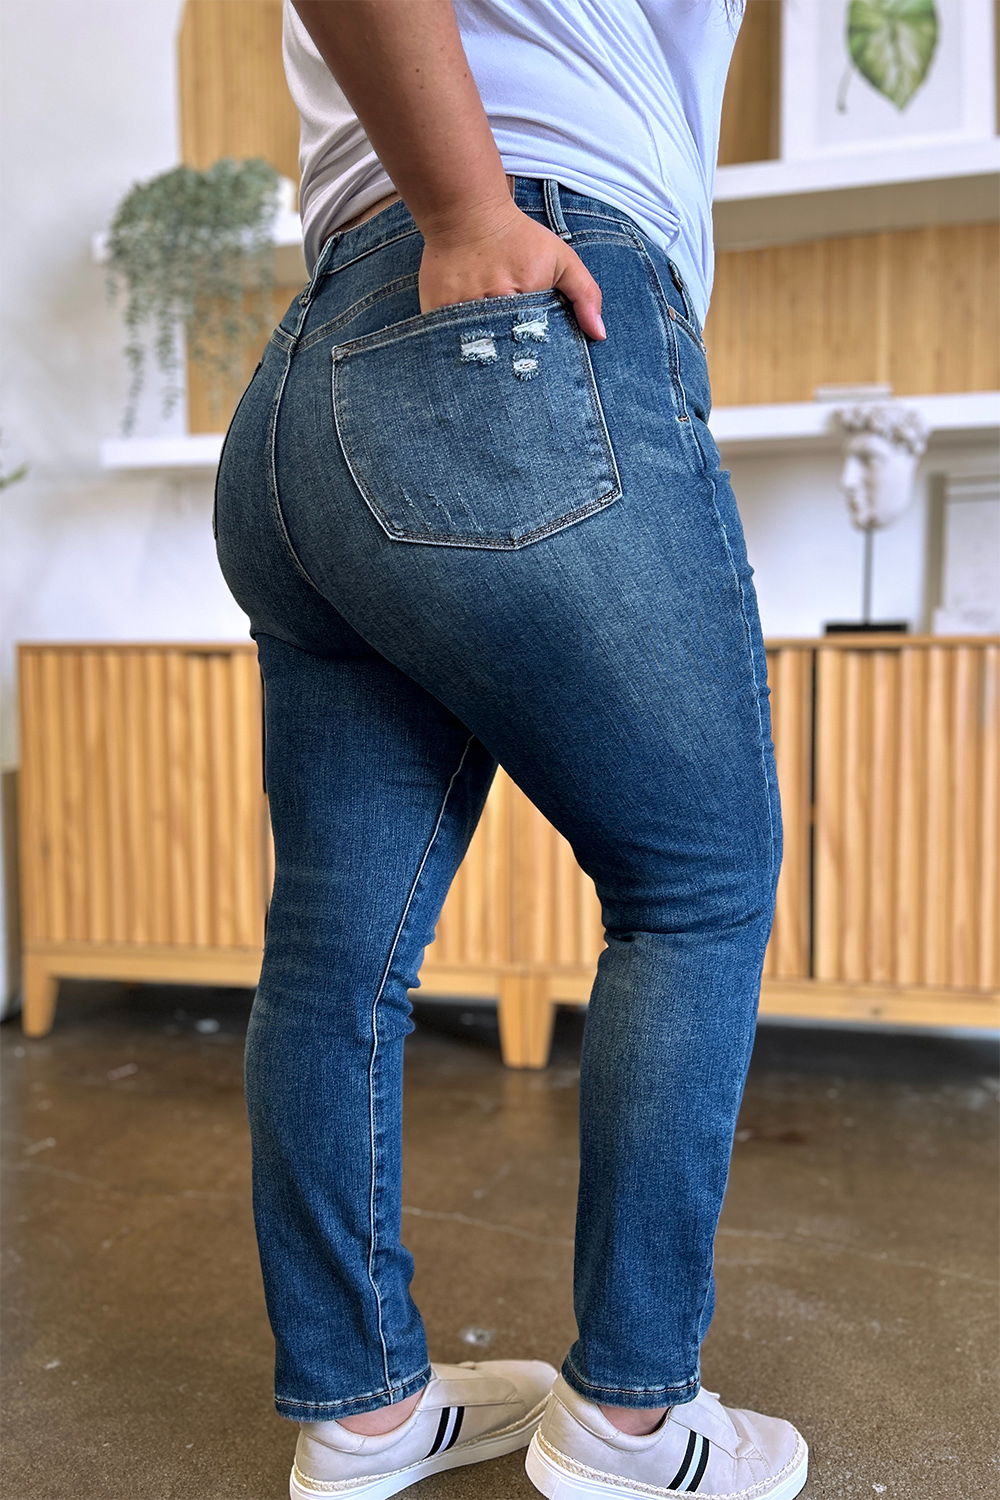 Shop Judy Blue Slim Jeans for unmatched style & comfort with tummy control, high-waist design, and inclusive sizing. Elevate your look now!